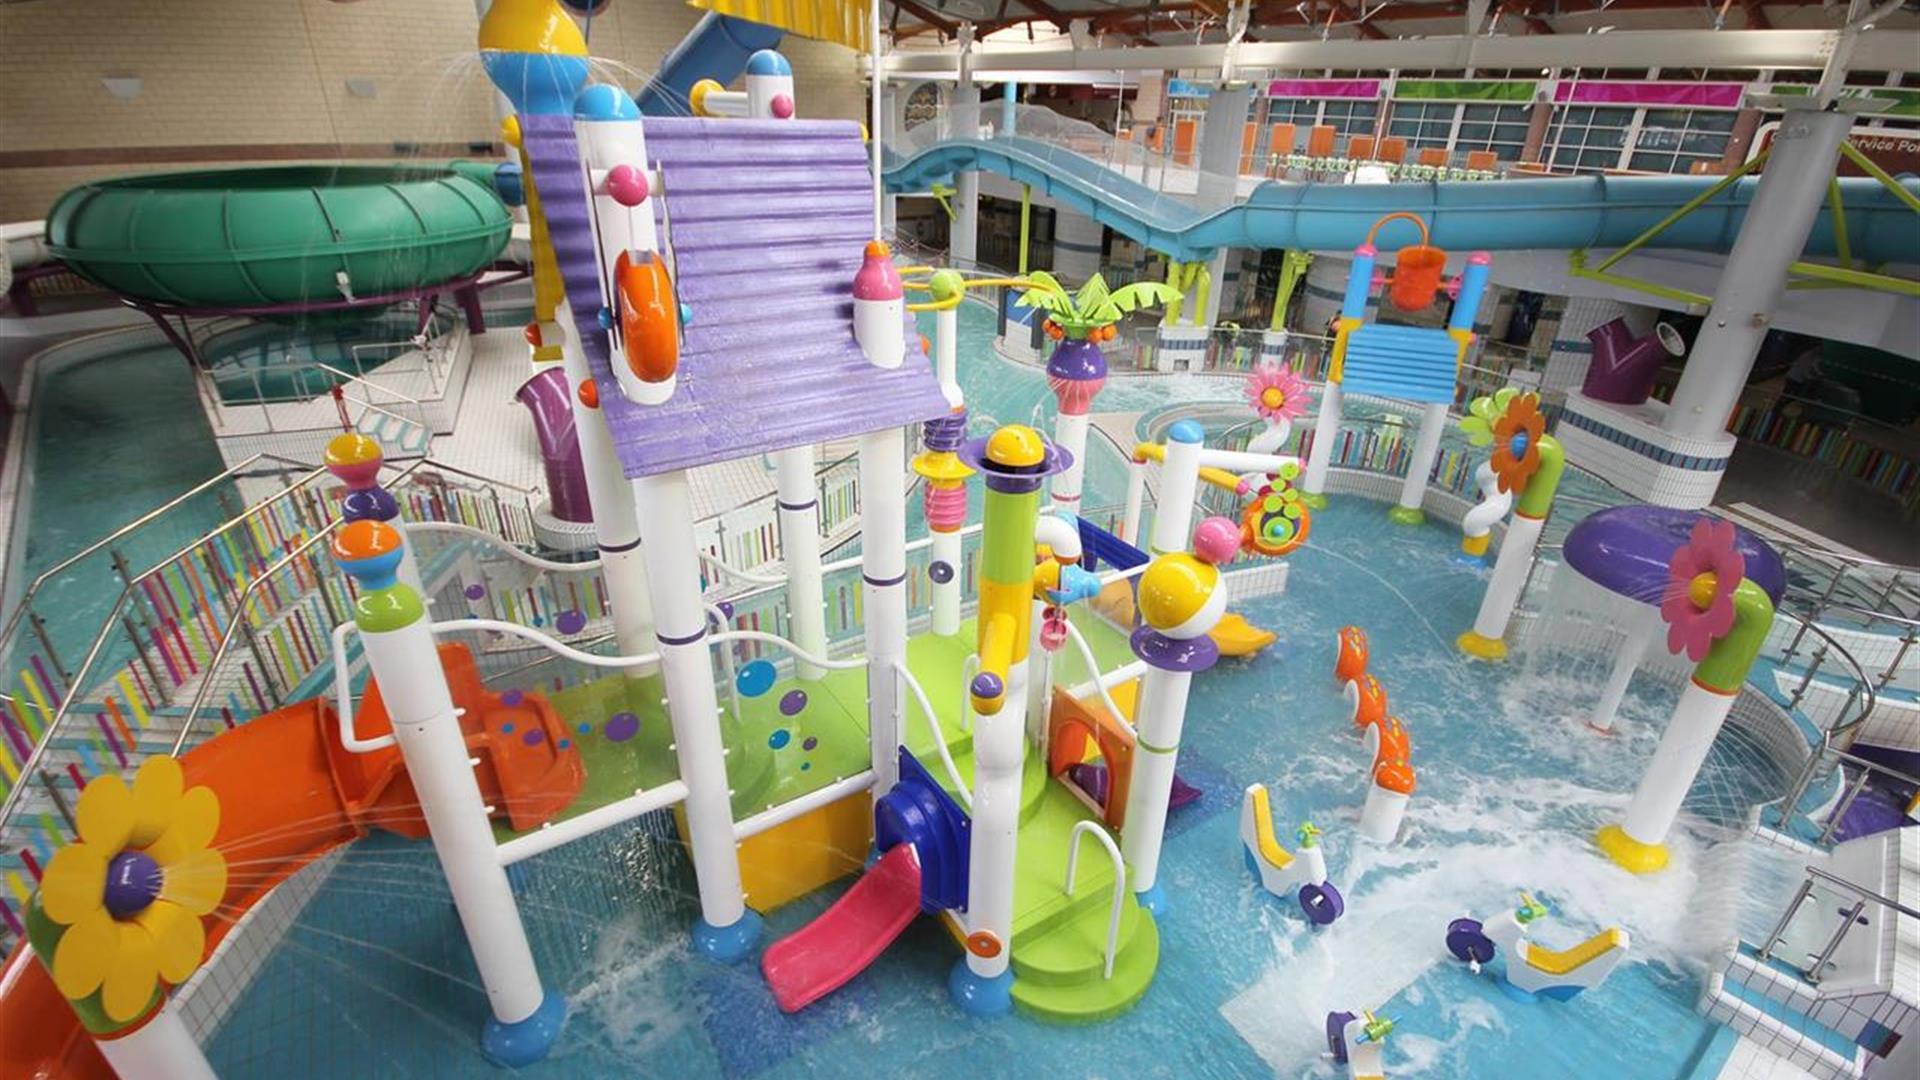 Image shows swimming pool with lots of brightly coloured slides